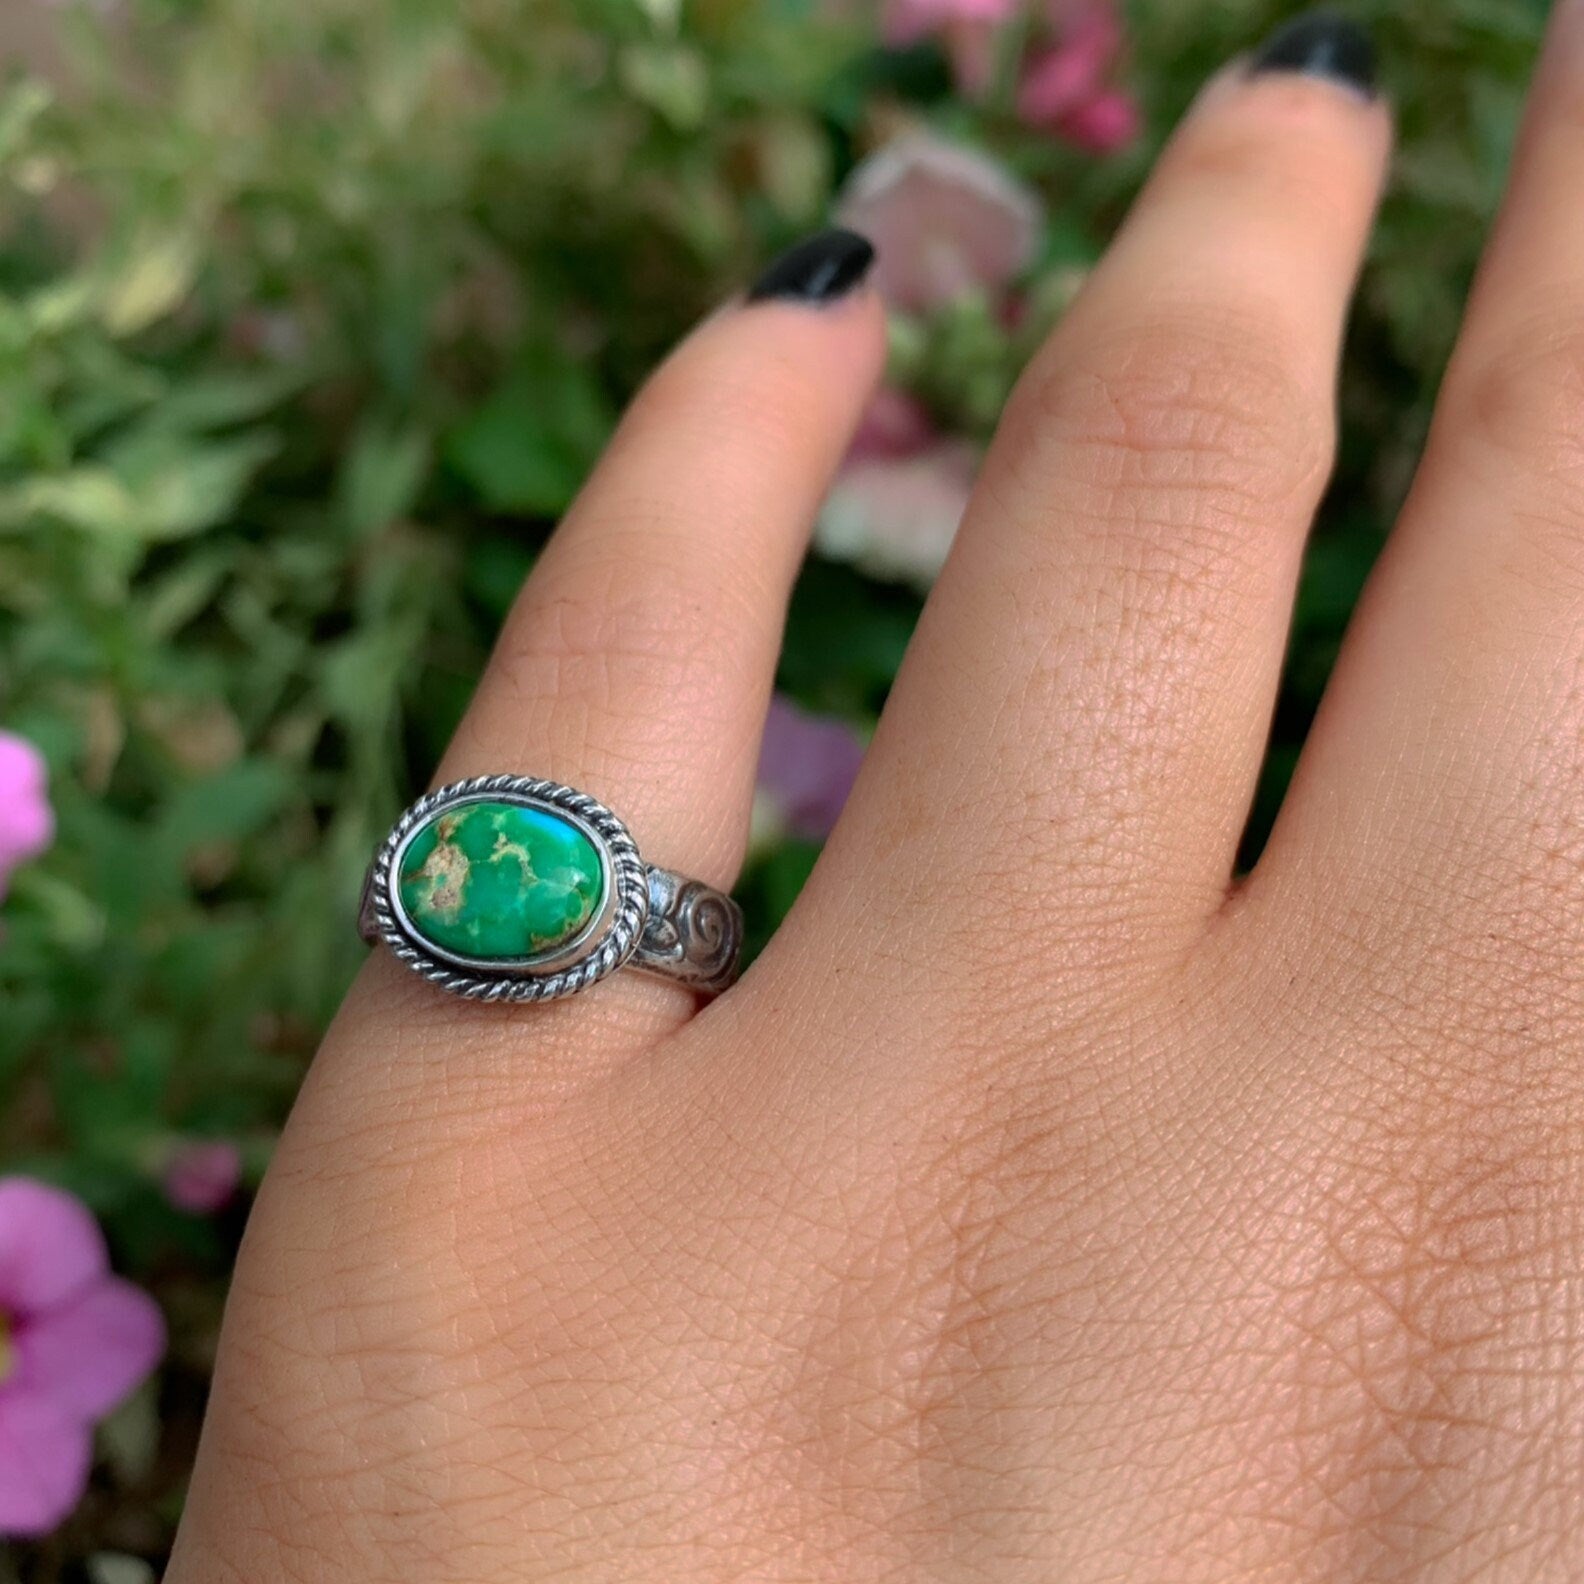 Sonoran Gold Turquoise Ring - Size 5 - Sterling Silver - Green Turquoise Jewellery - Aqua Turquoise Jewelry - Thick Band Turquoise Ring OOAK